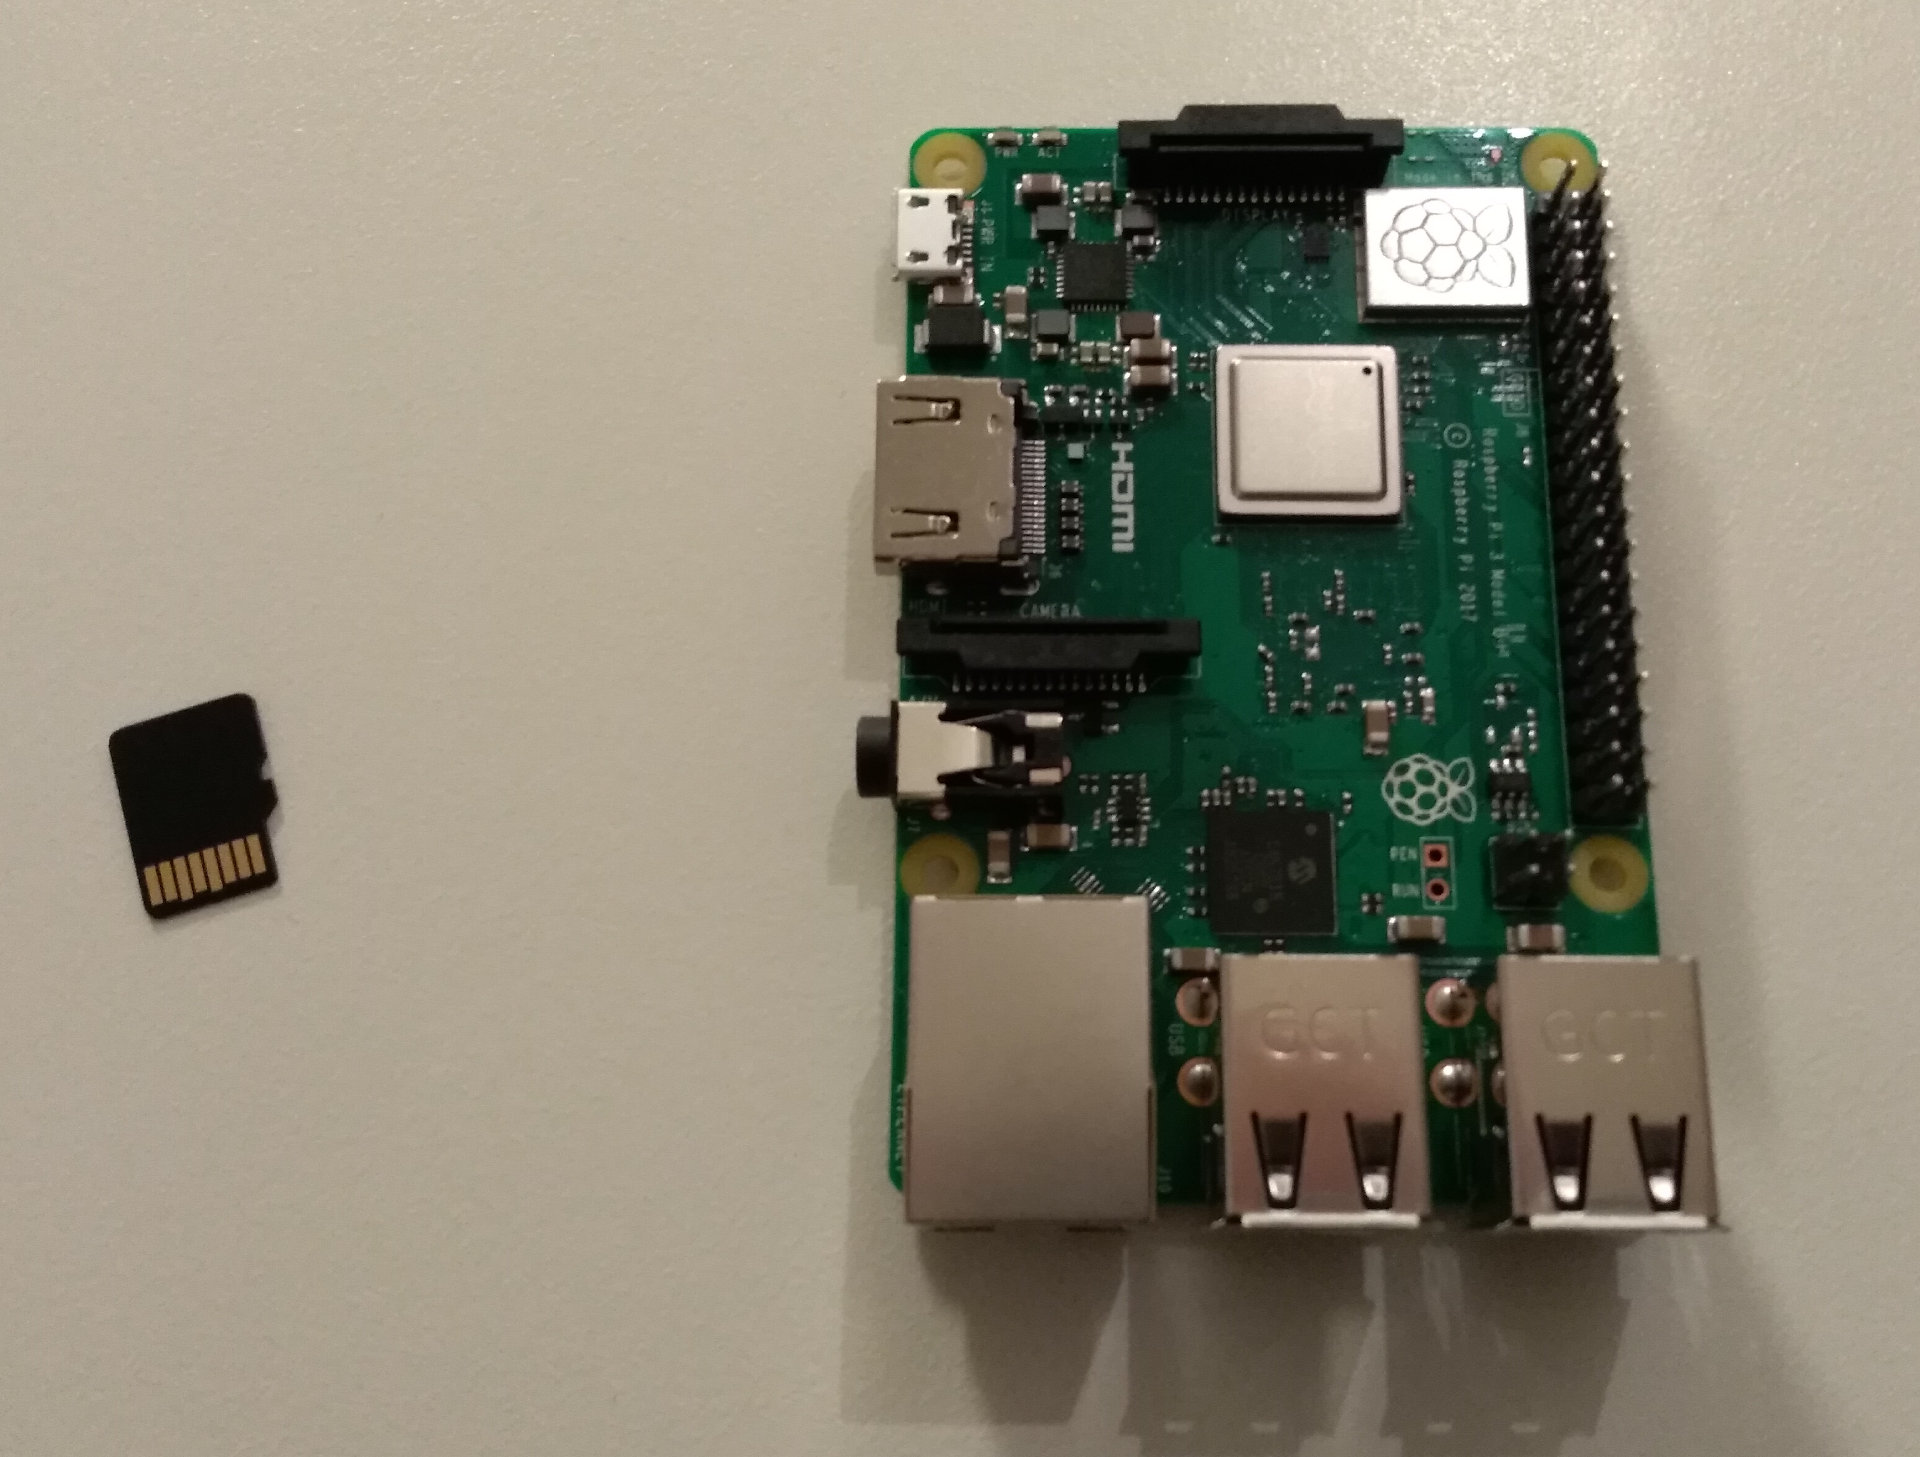 Raspberry Pi and MicroSD card side by side